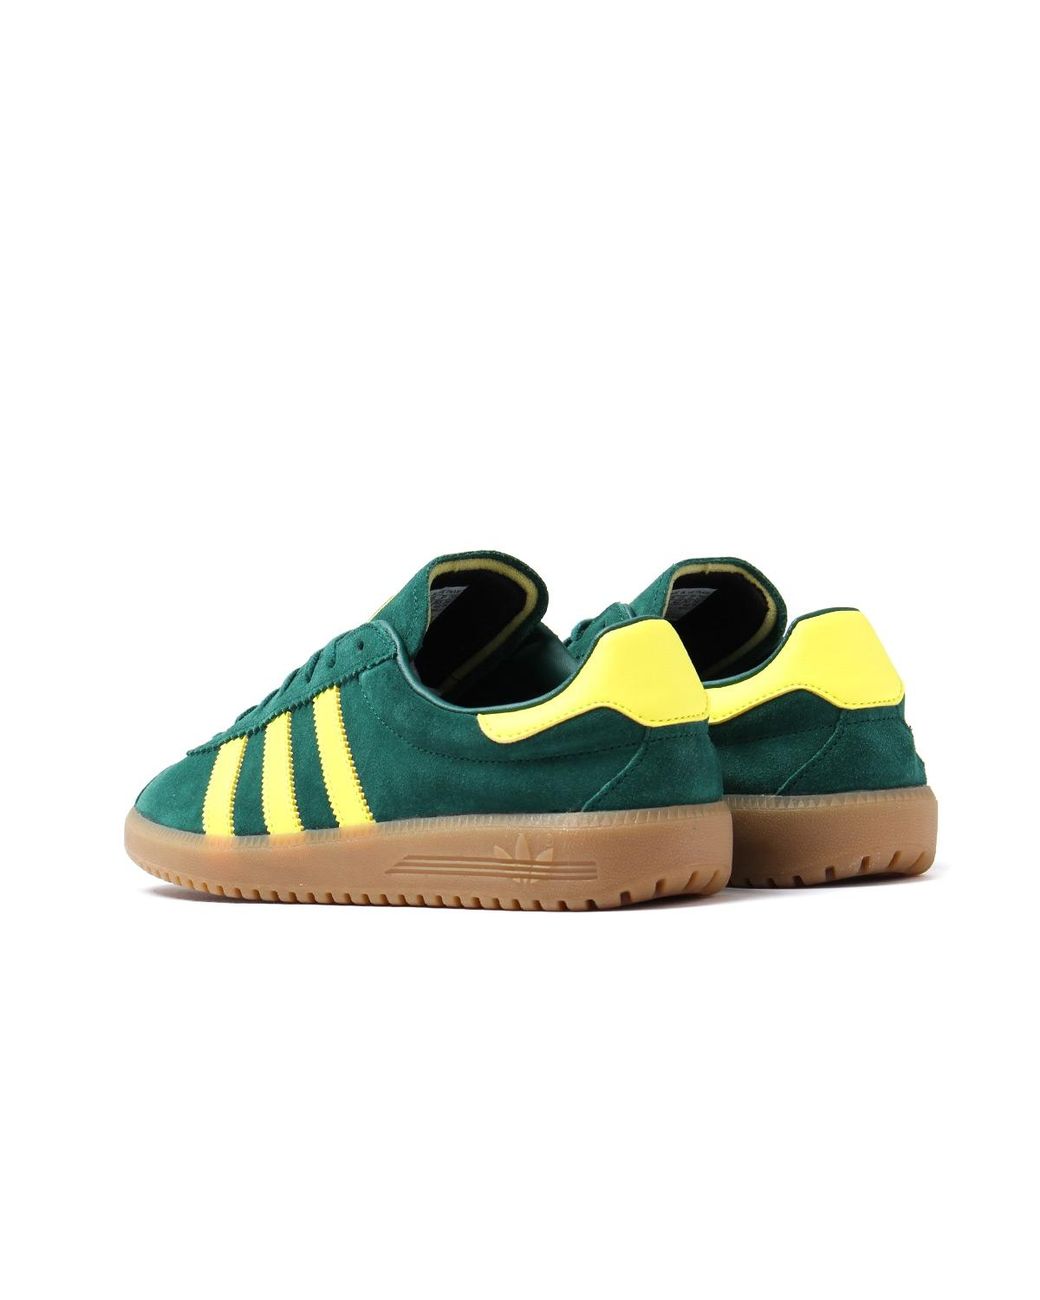 adidas bermuda green yellow - OFF-56% >Free Delivery